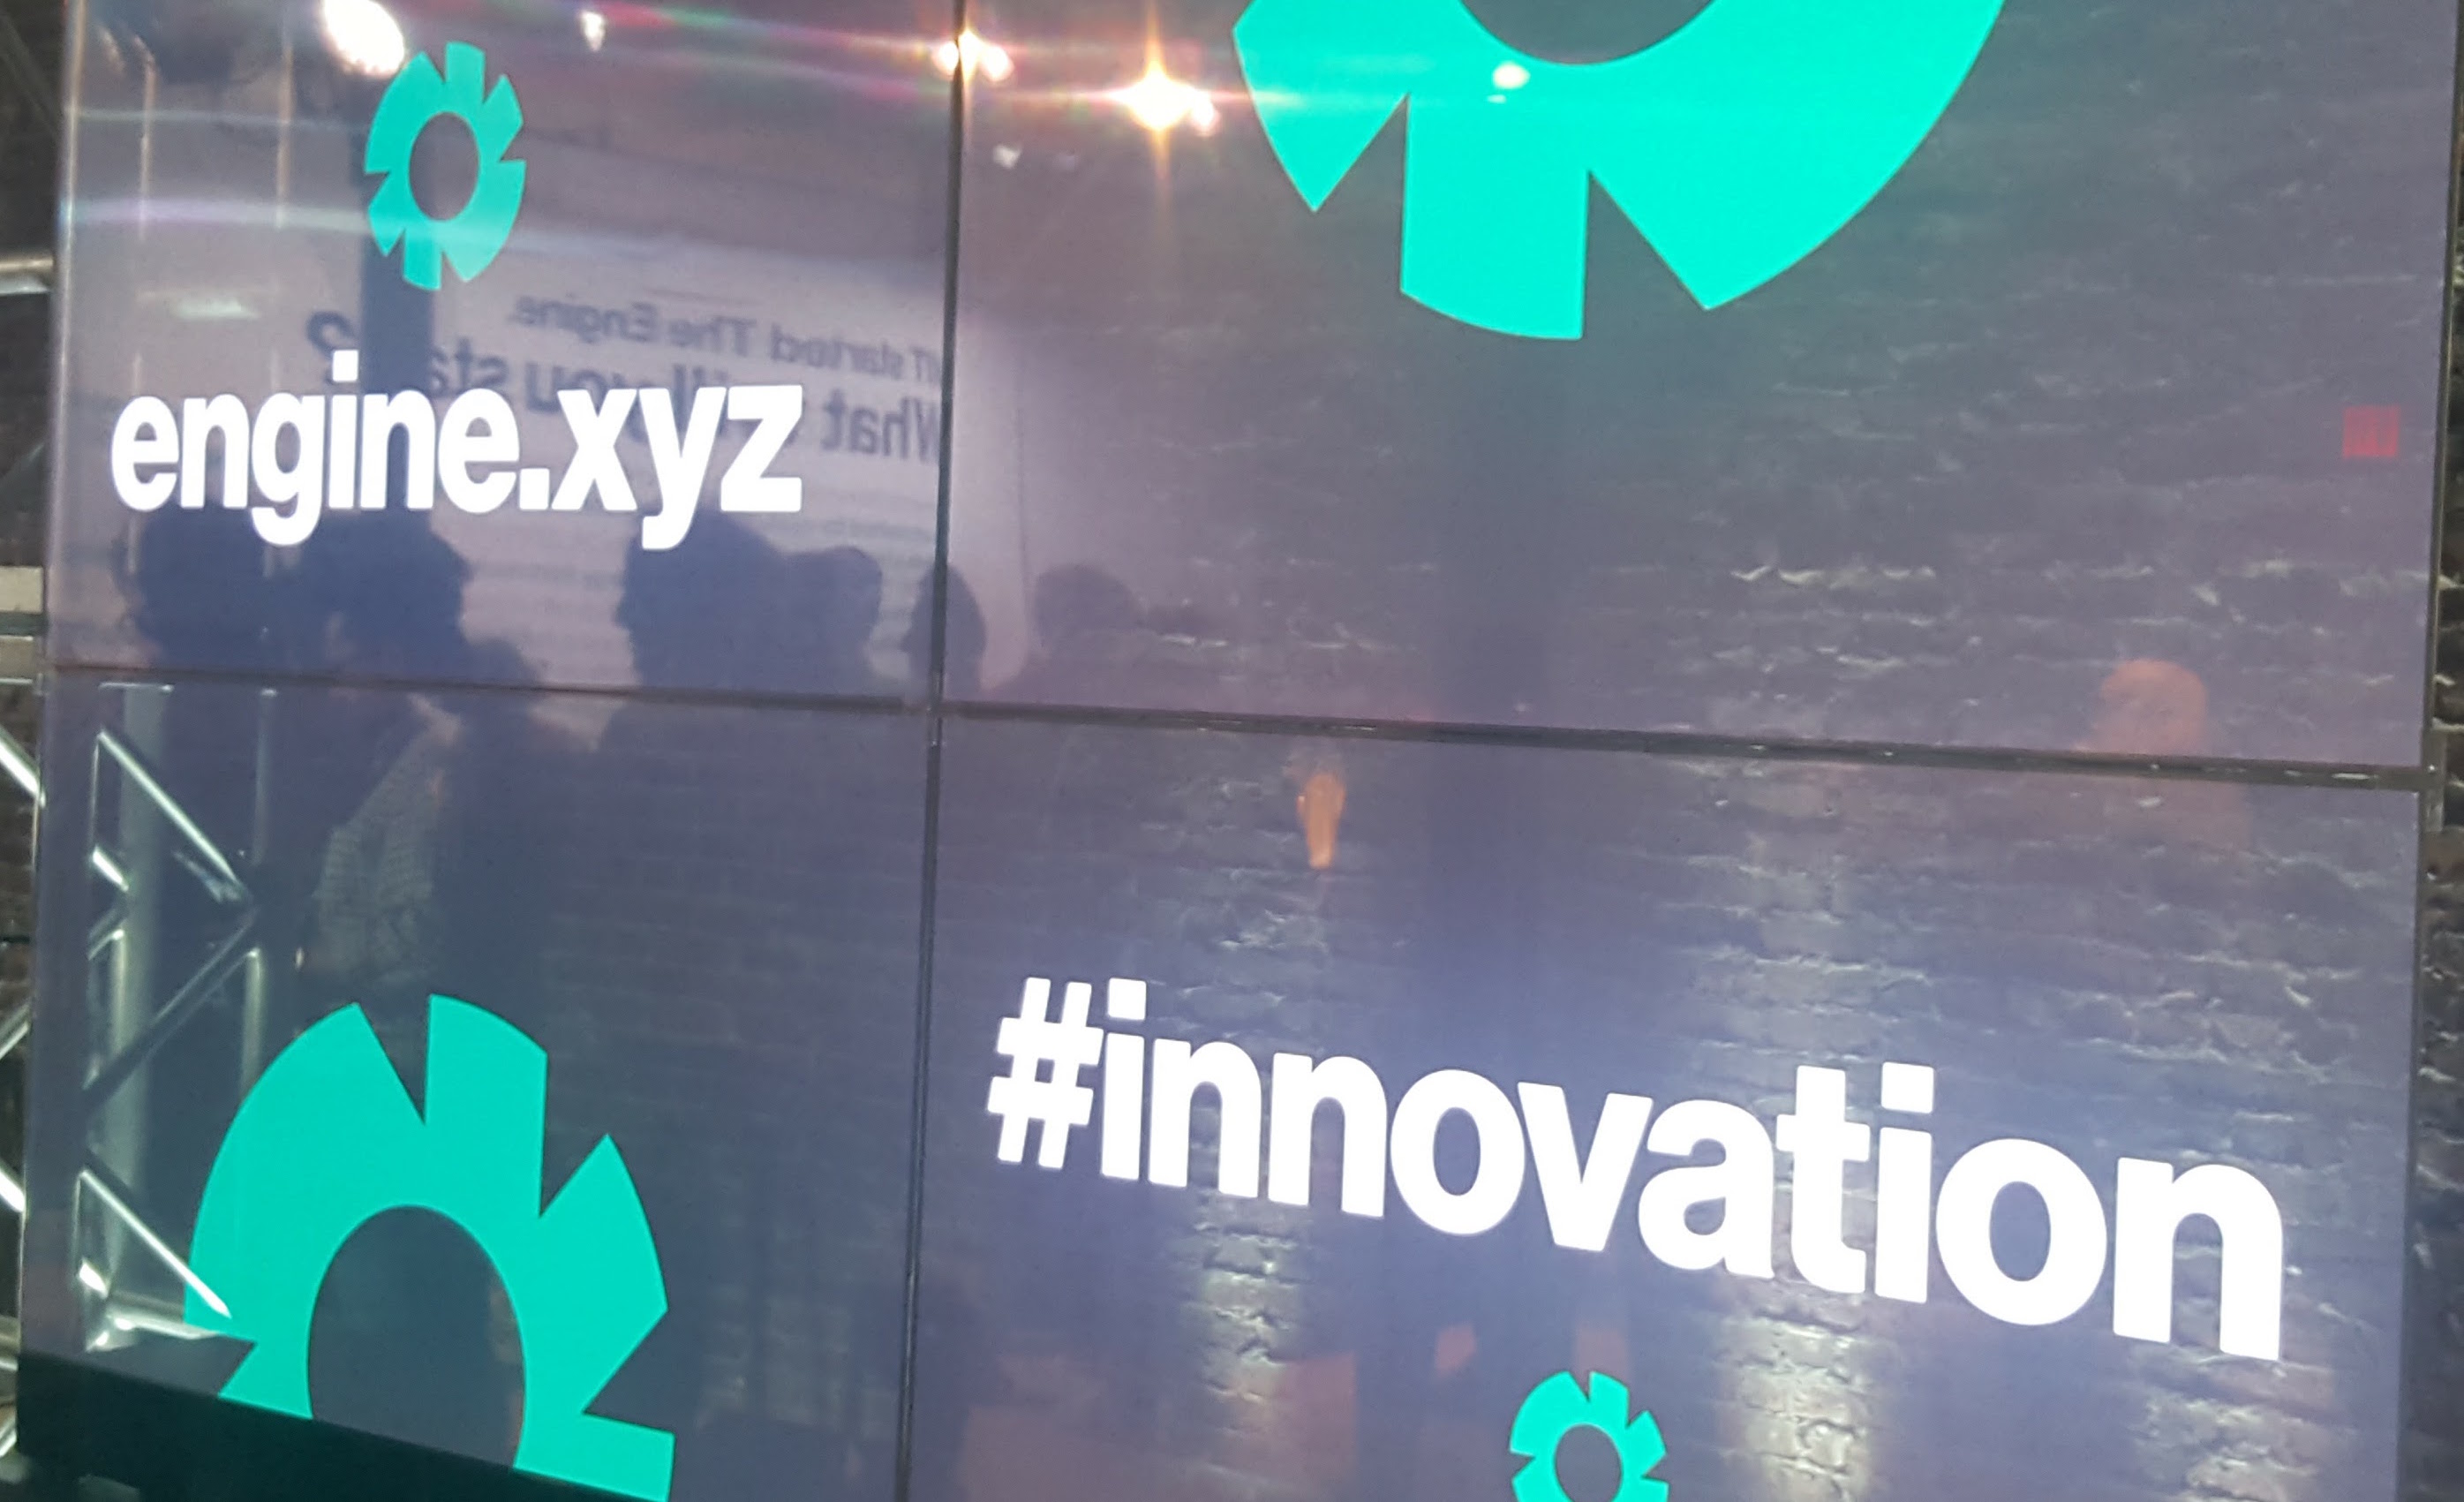 Display wall with The Engine logo in green and engine.xyz and hashtag innovation in white